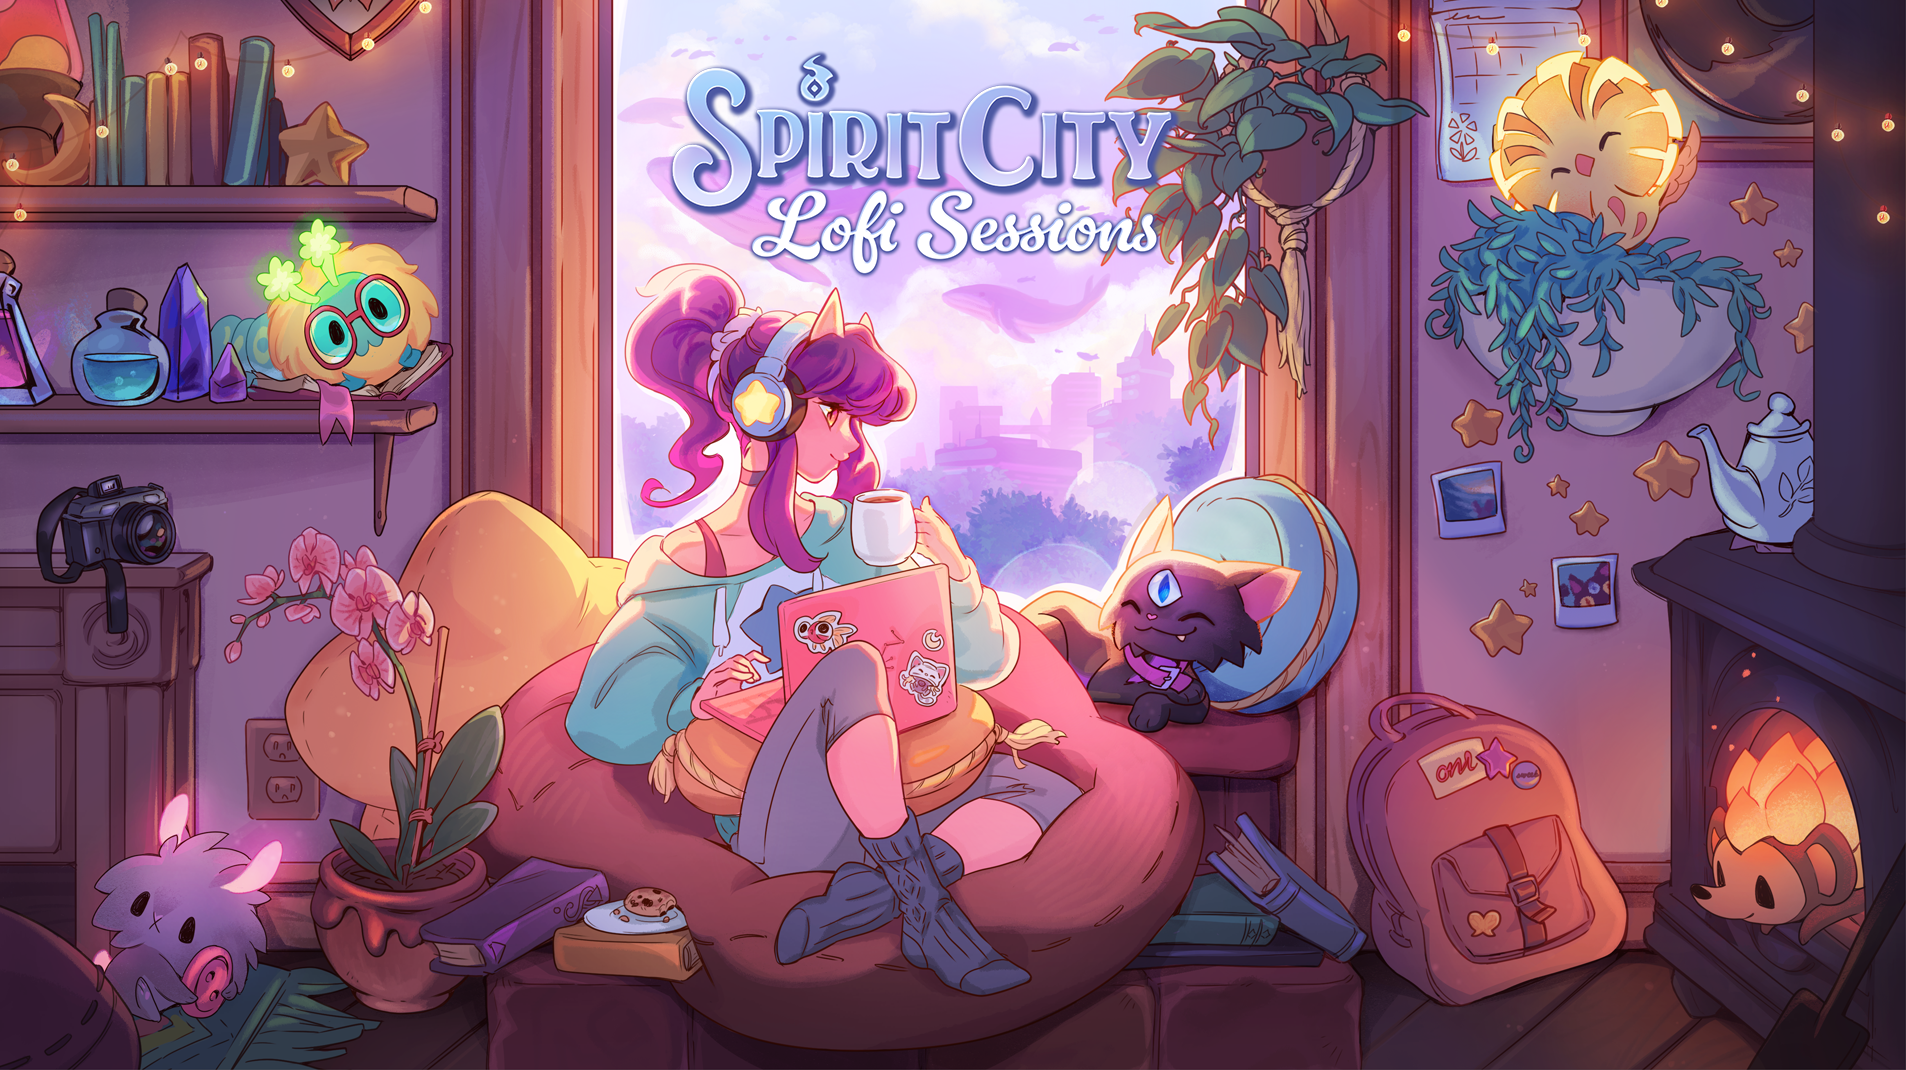 Inspired by Lofi Girl, Spirit City: Lofi Sessions is a “gamified focus tool”